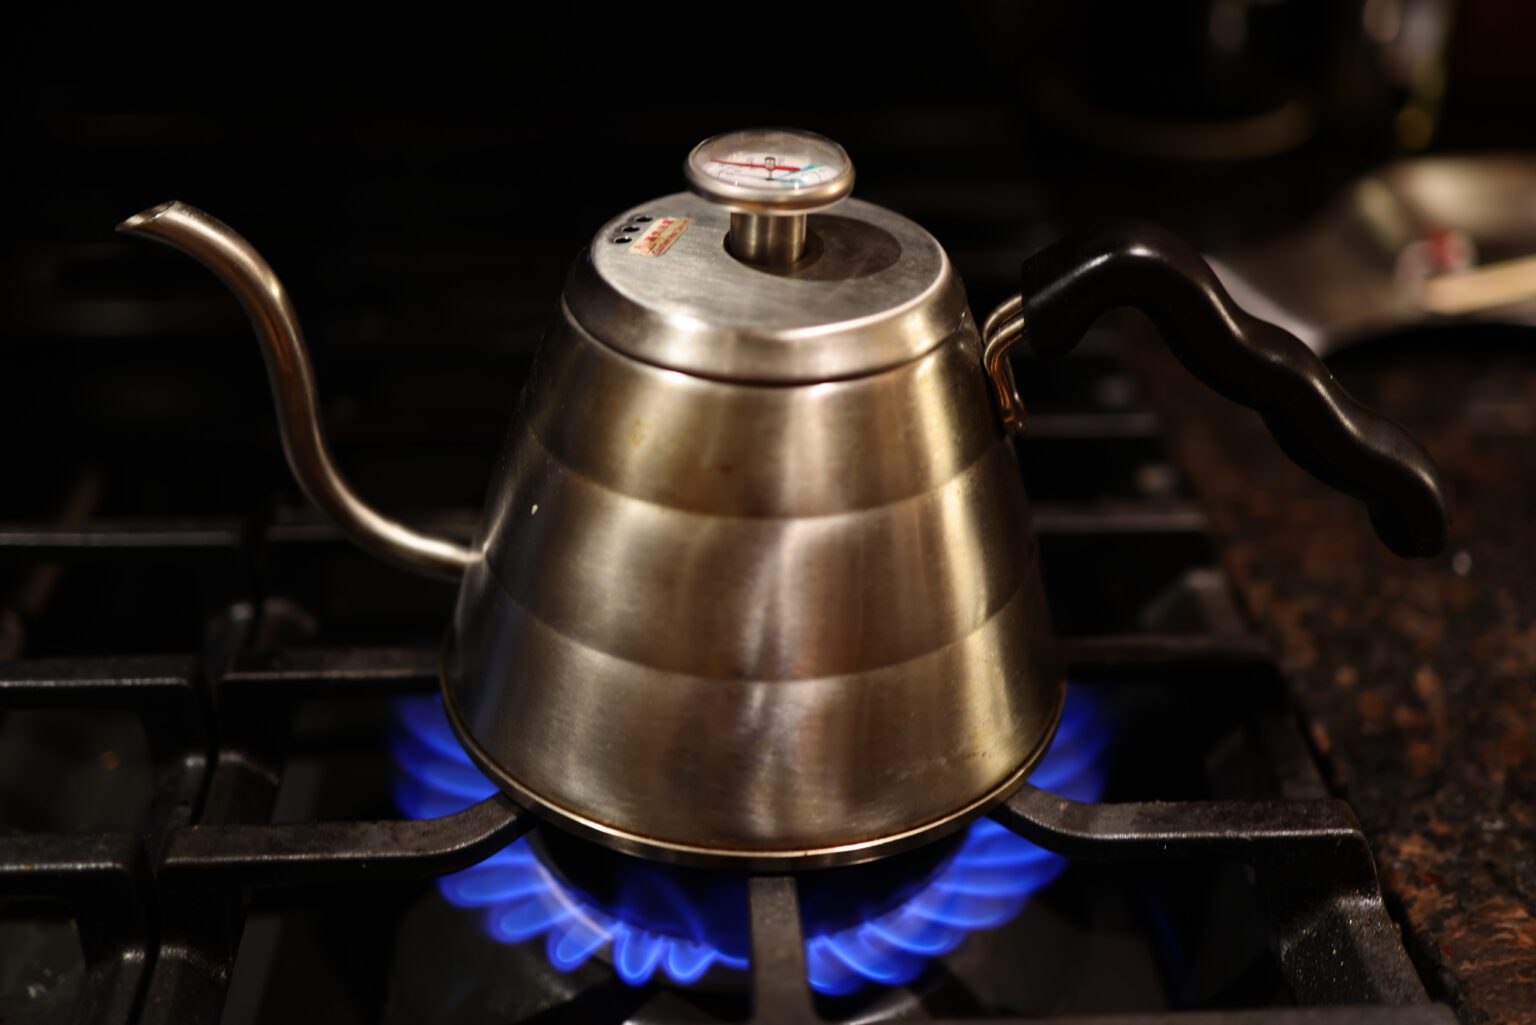 Gas stoves have ignited a nationwide debate over clean energy.